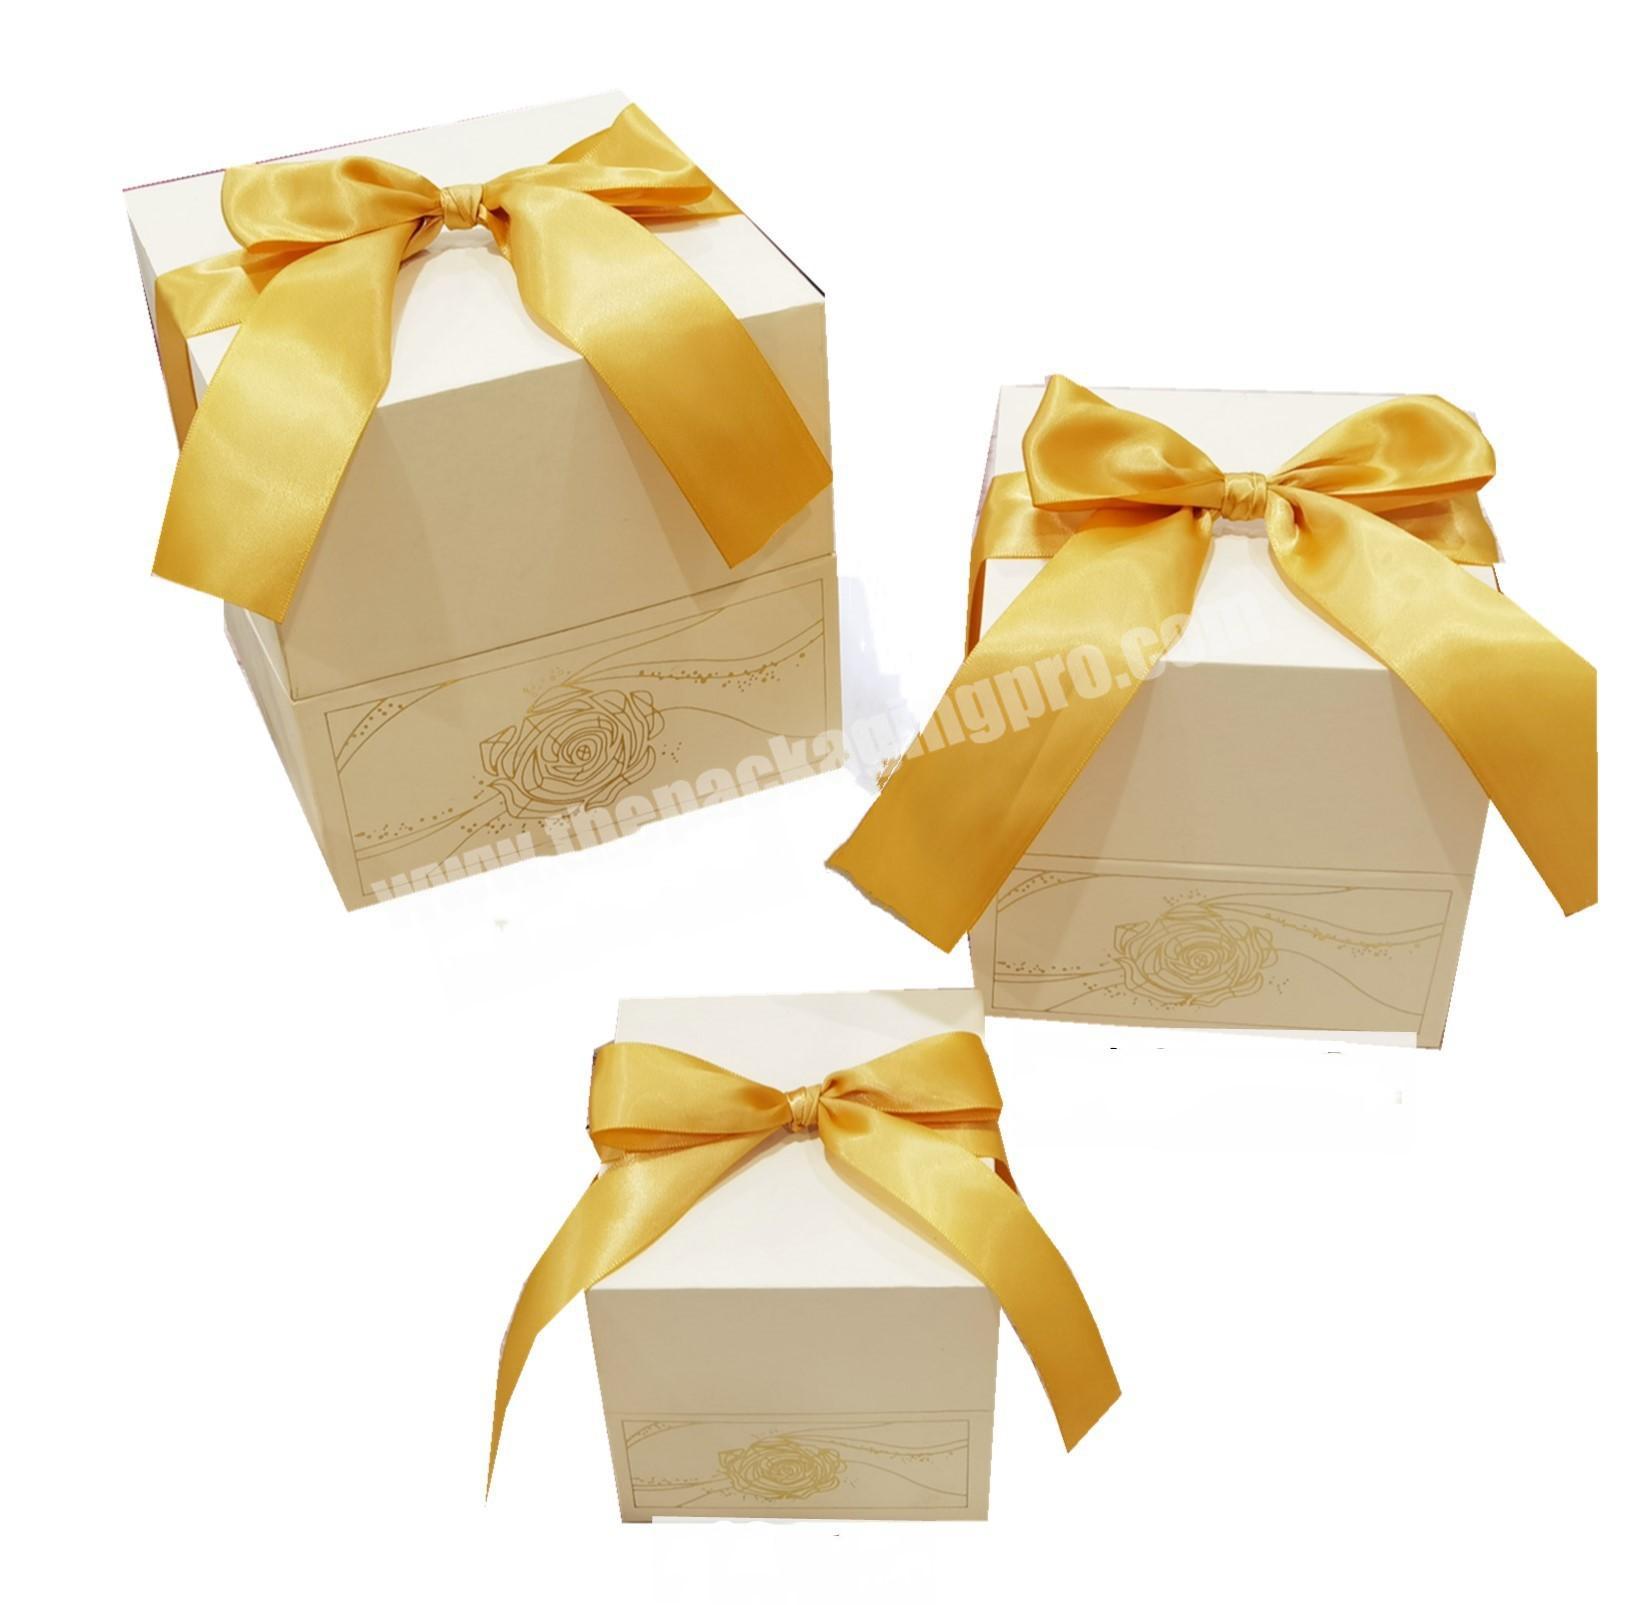 China Factory Wholesale Customized Square Gift Packaging Boxes Sets Wedding Favor Candy Storage Boxes With Ribbon